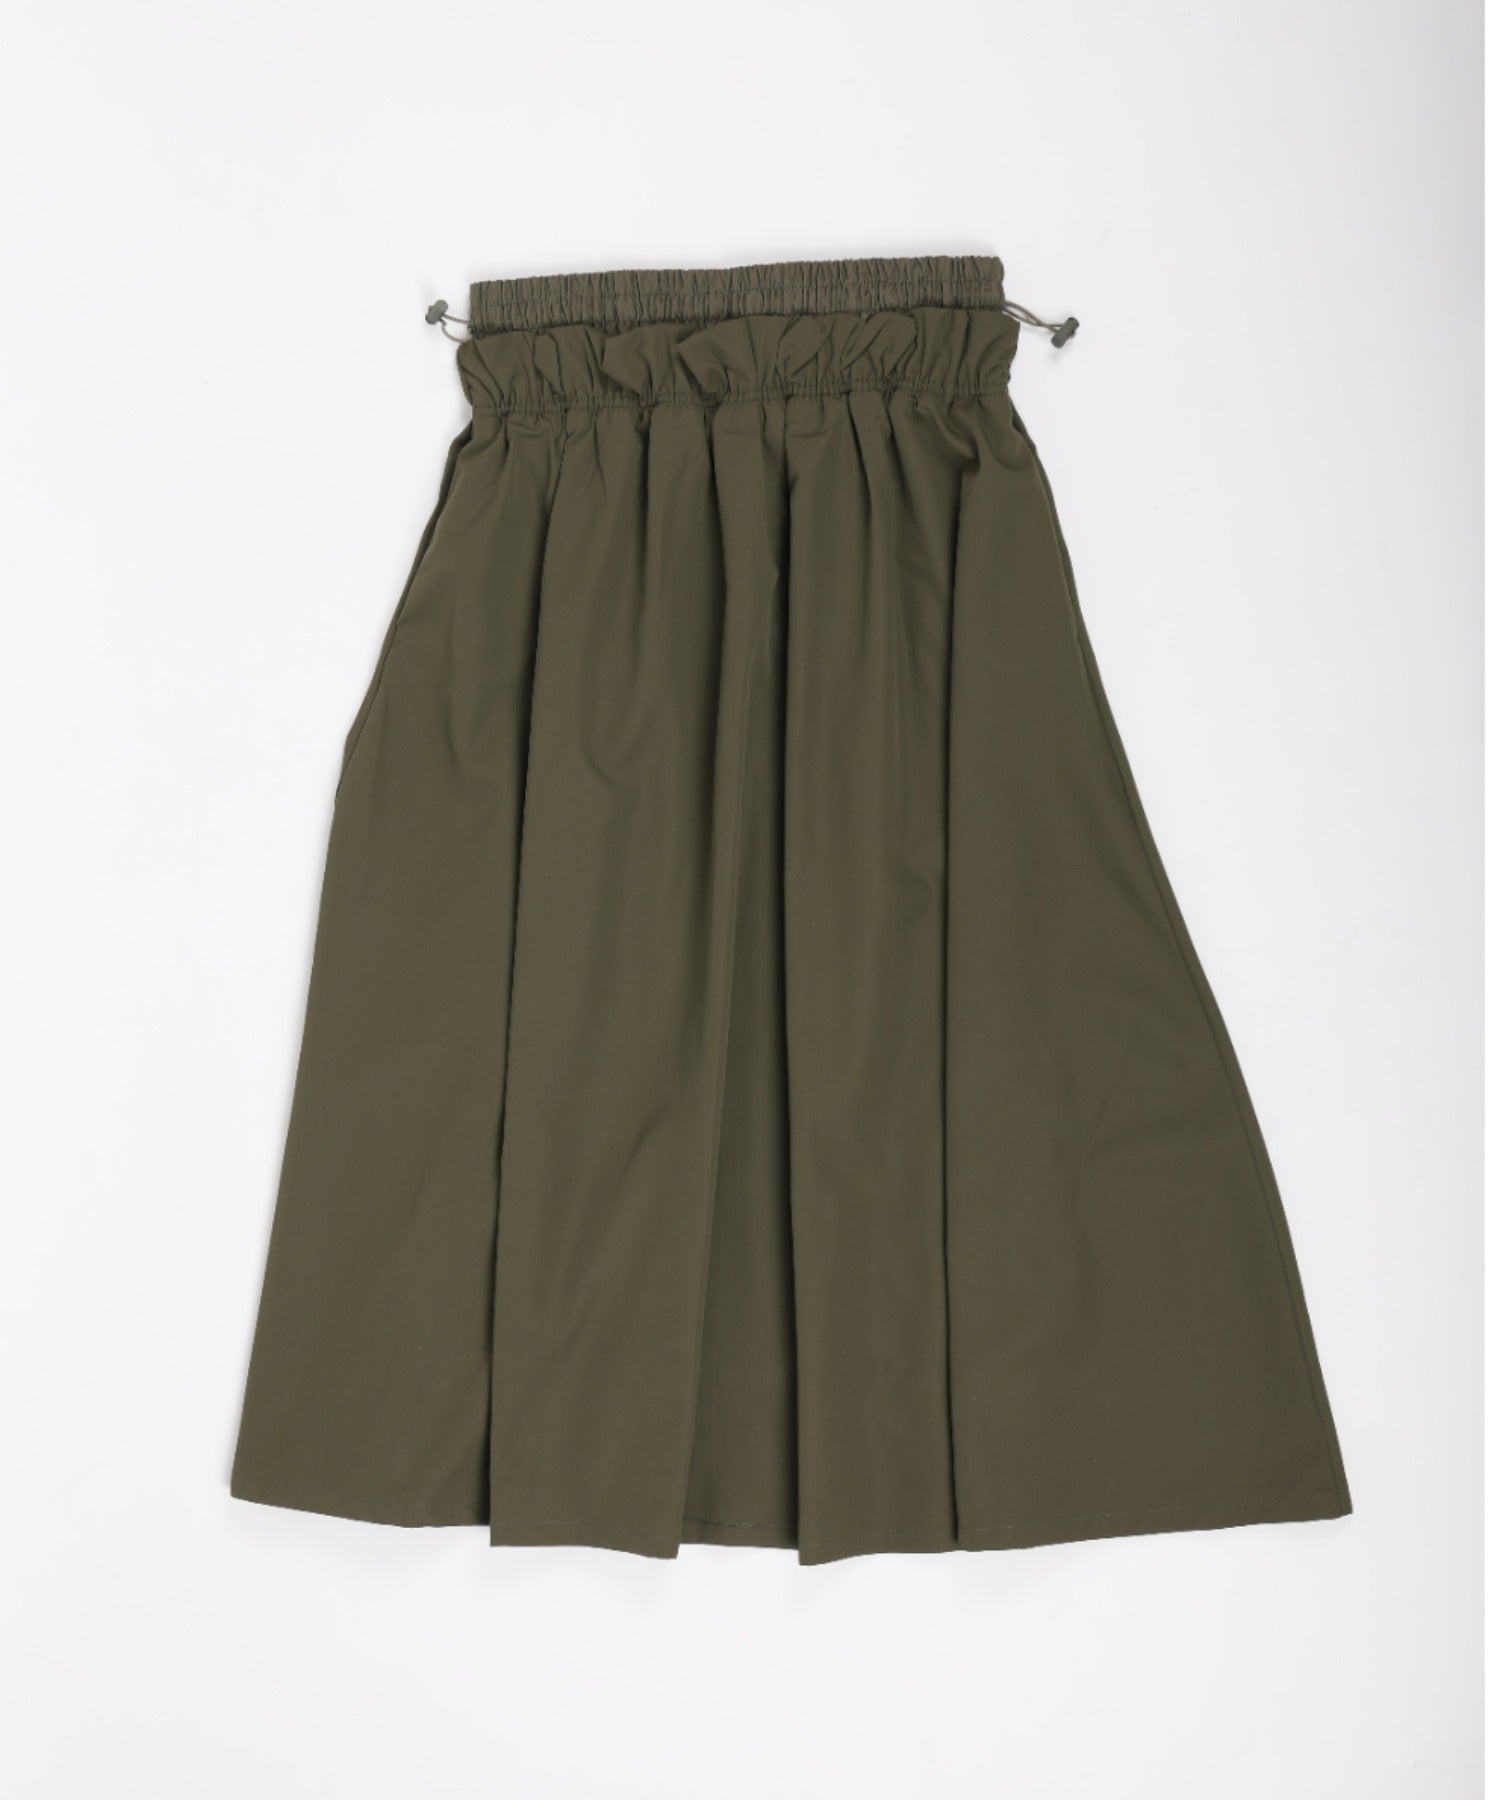 S'more/Water-repellent flare skirt